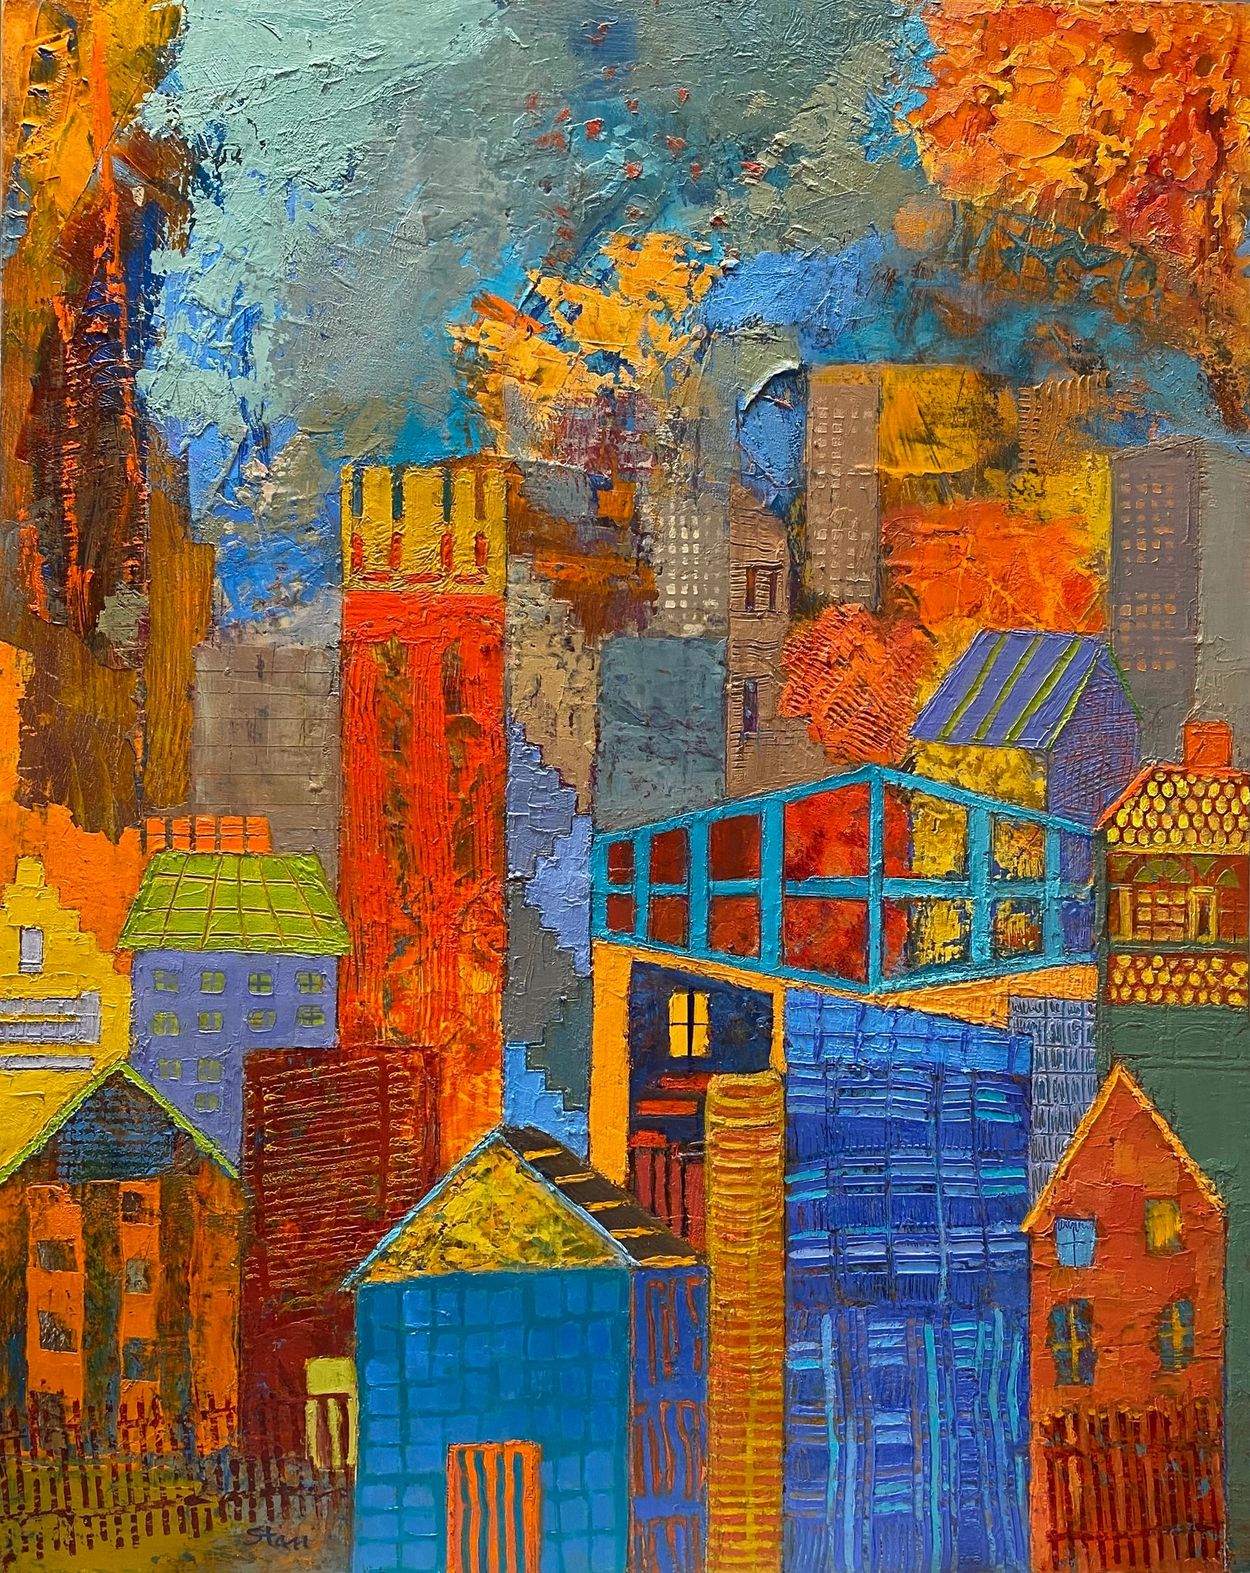 City with fire images in oranges, reds, blue, abstracted, fanciful